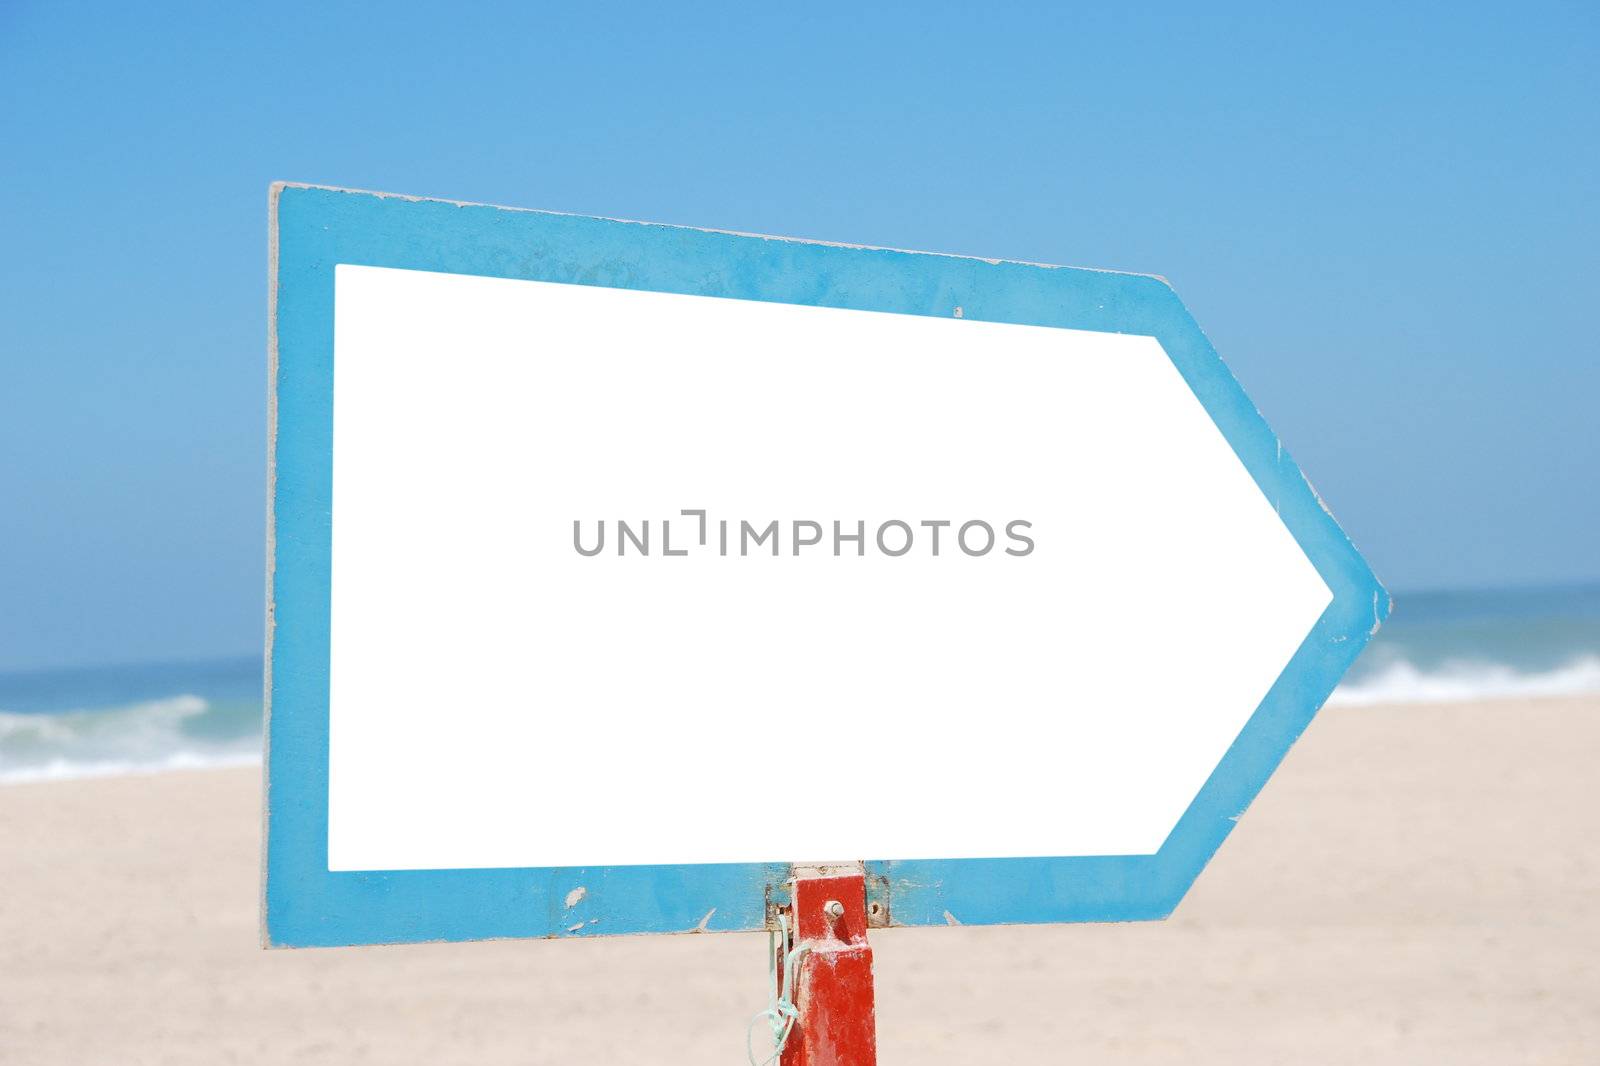 Sign at the beach by luissantos84